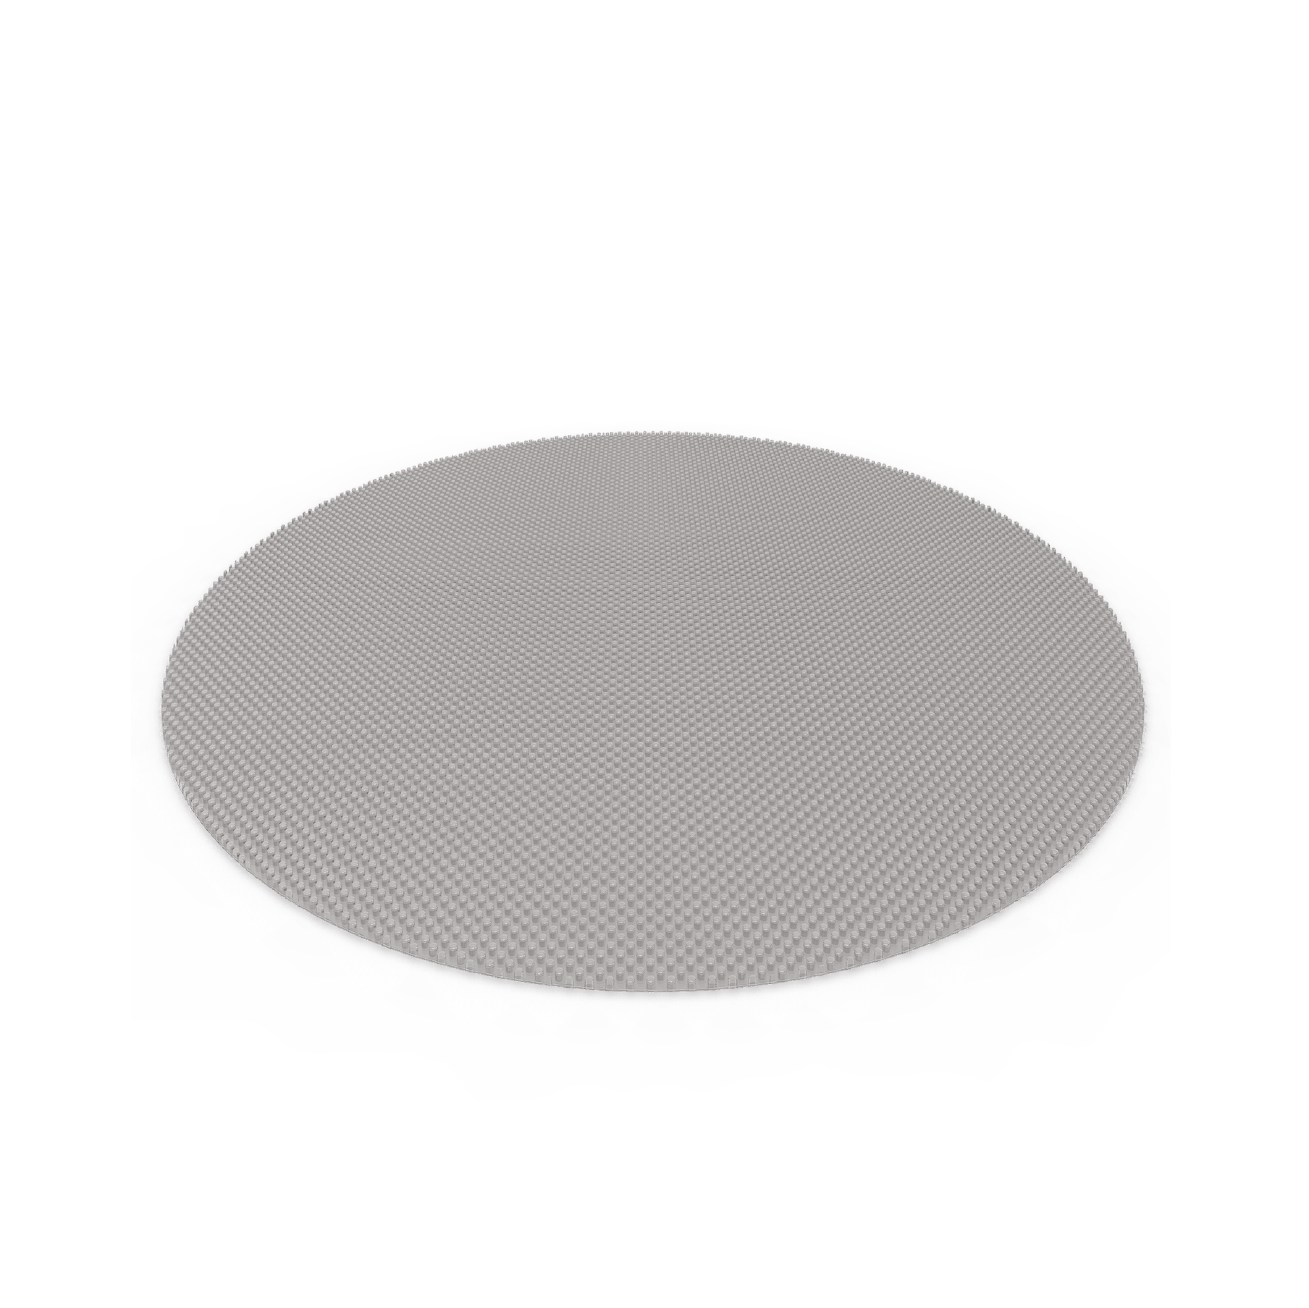 Wave Spa Round 6 Person Bubble Cover, Floating, Energy Saving Eco Liner - Insulating Products - Wave Spas USA